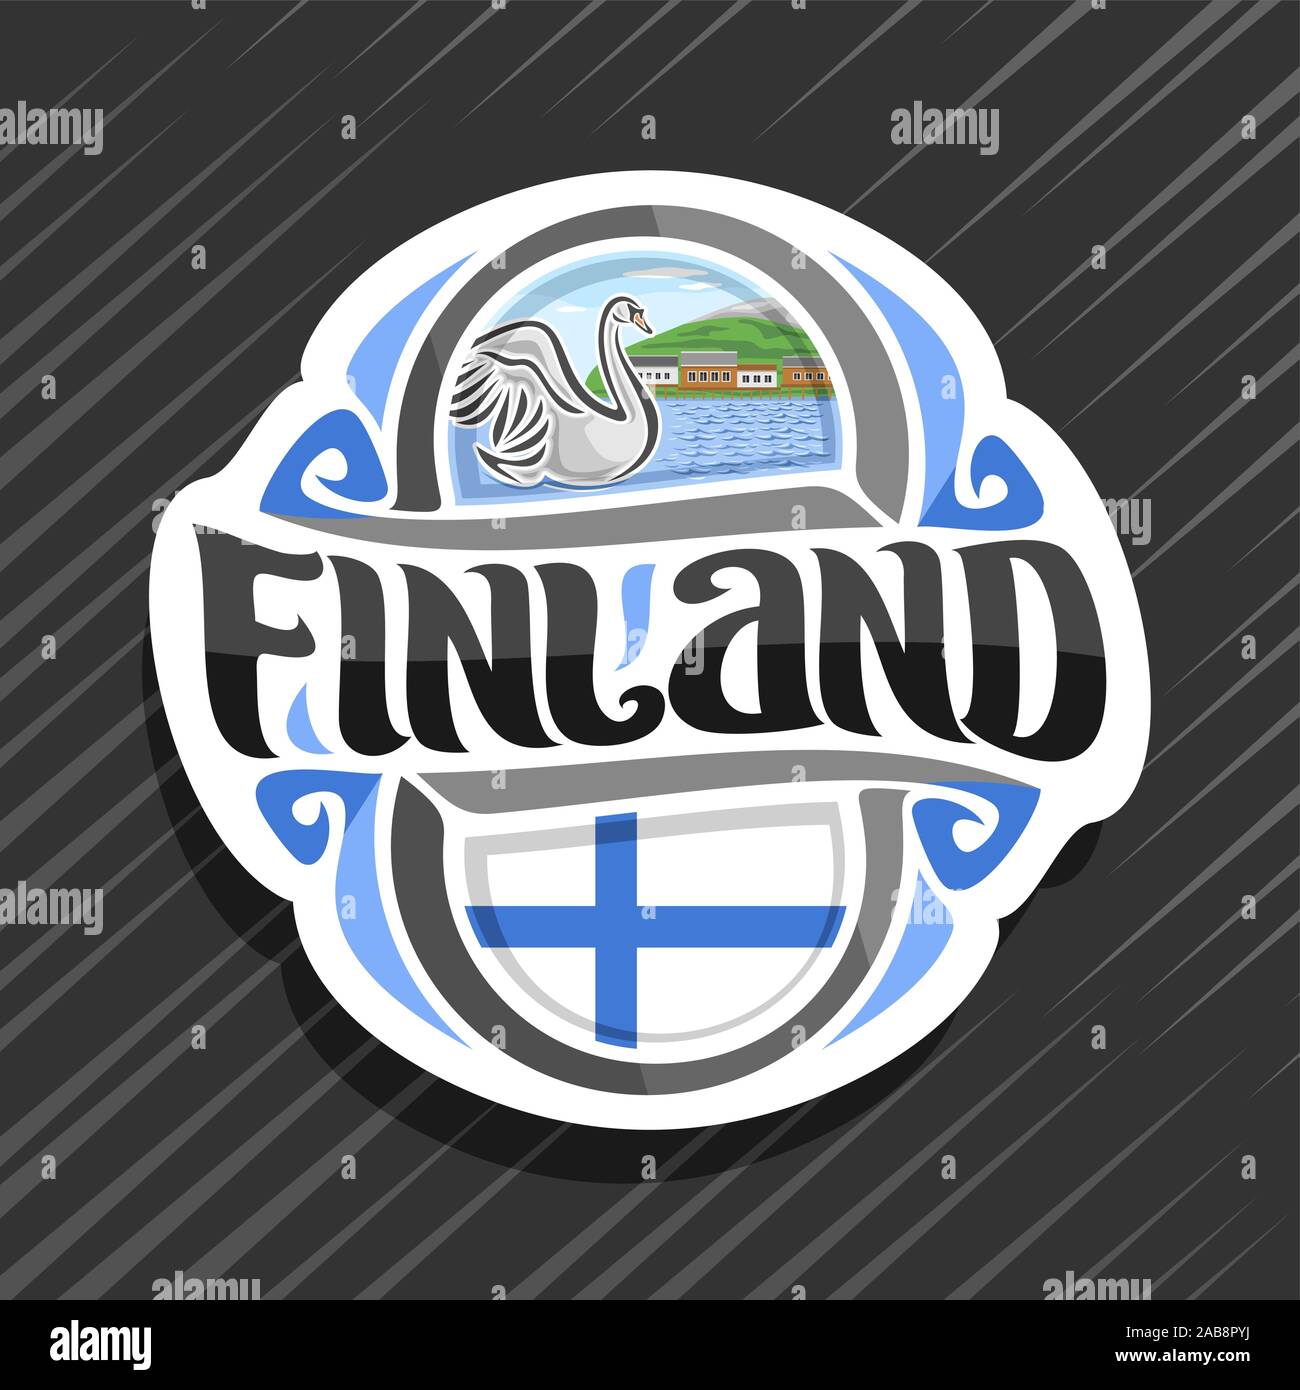 Vector logo for Finland country, fridge magnet with finnish flag, original brush typeface for word finland and finnish symbol - white swan in lake of Stock Vector